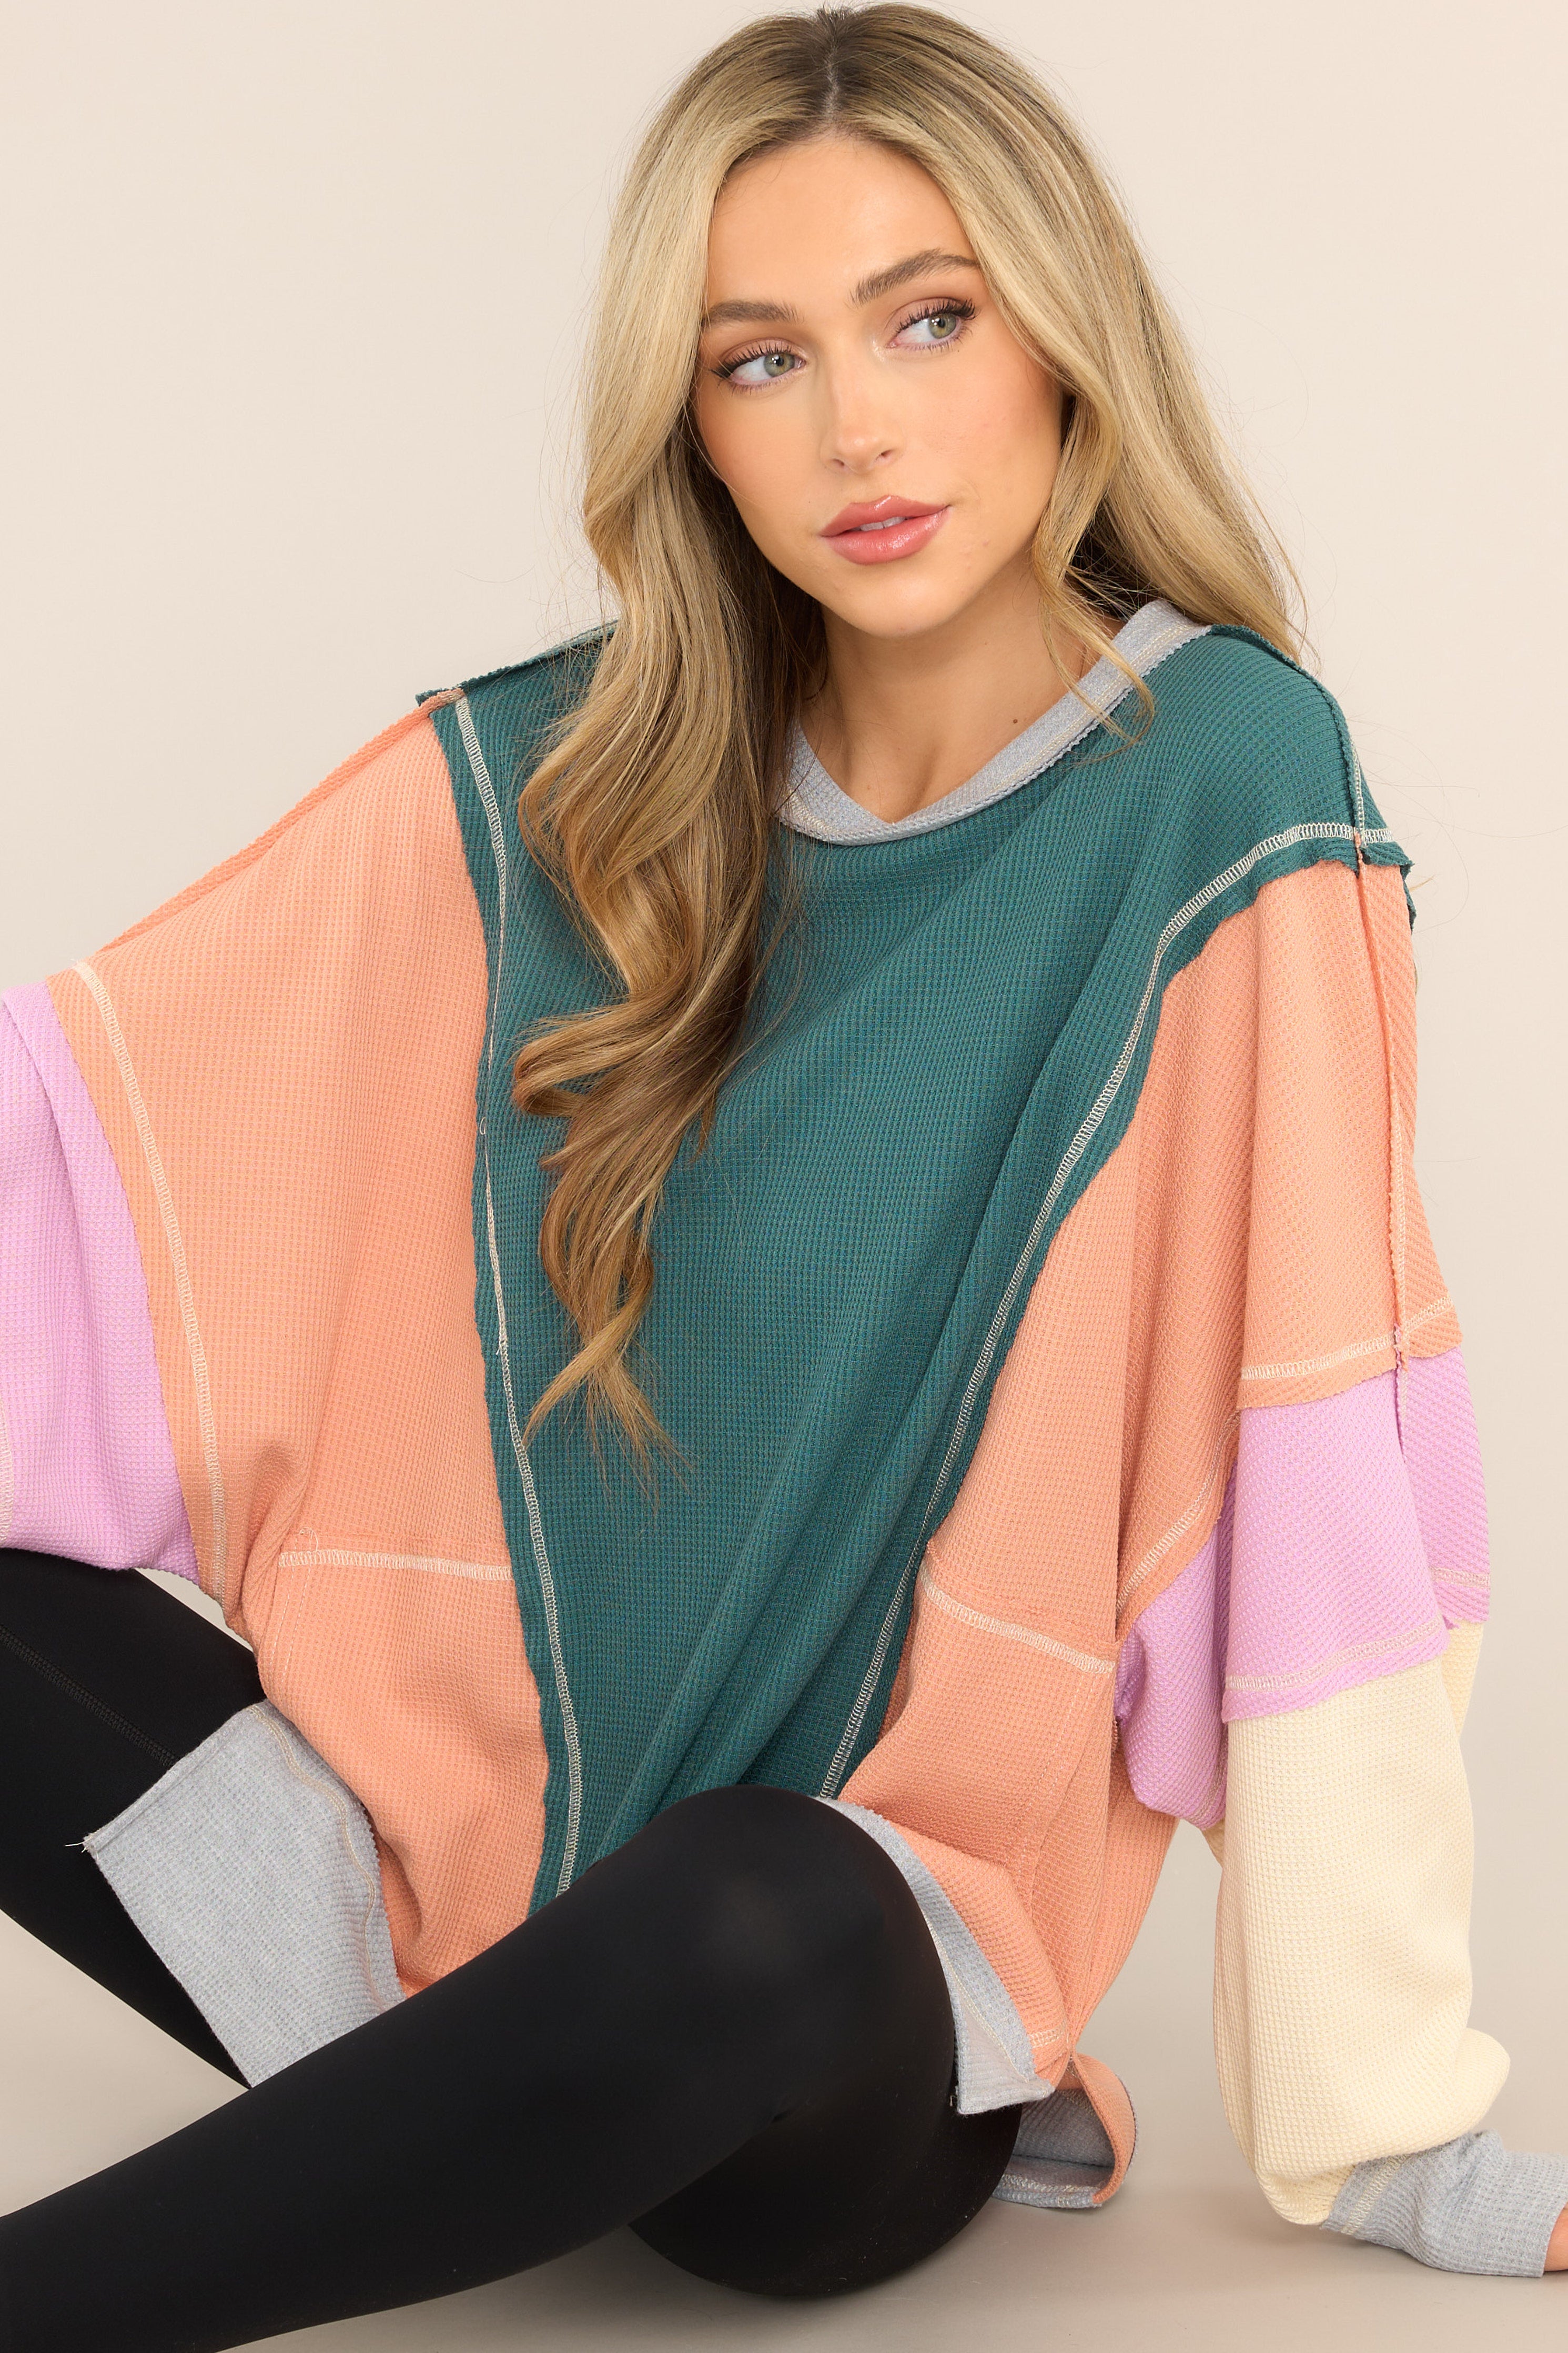 This  multi-colored top features a crew neckline, dropped shoulders, front pockets, a waffle knit material, cuffed sleeves, and a high-low split hemline. 